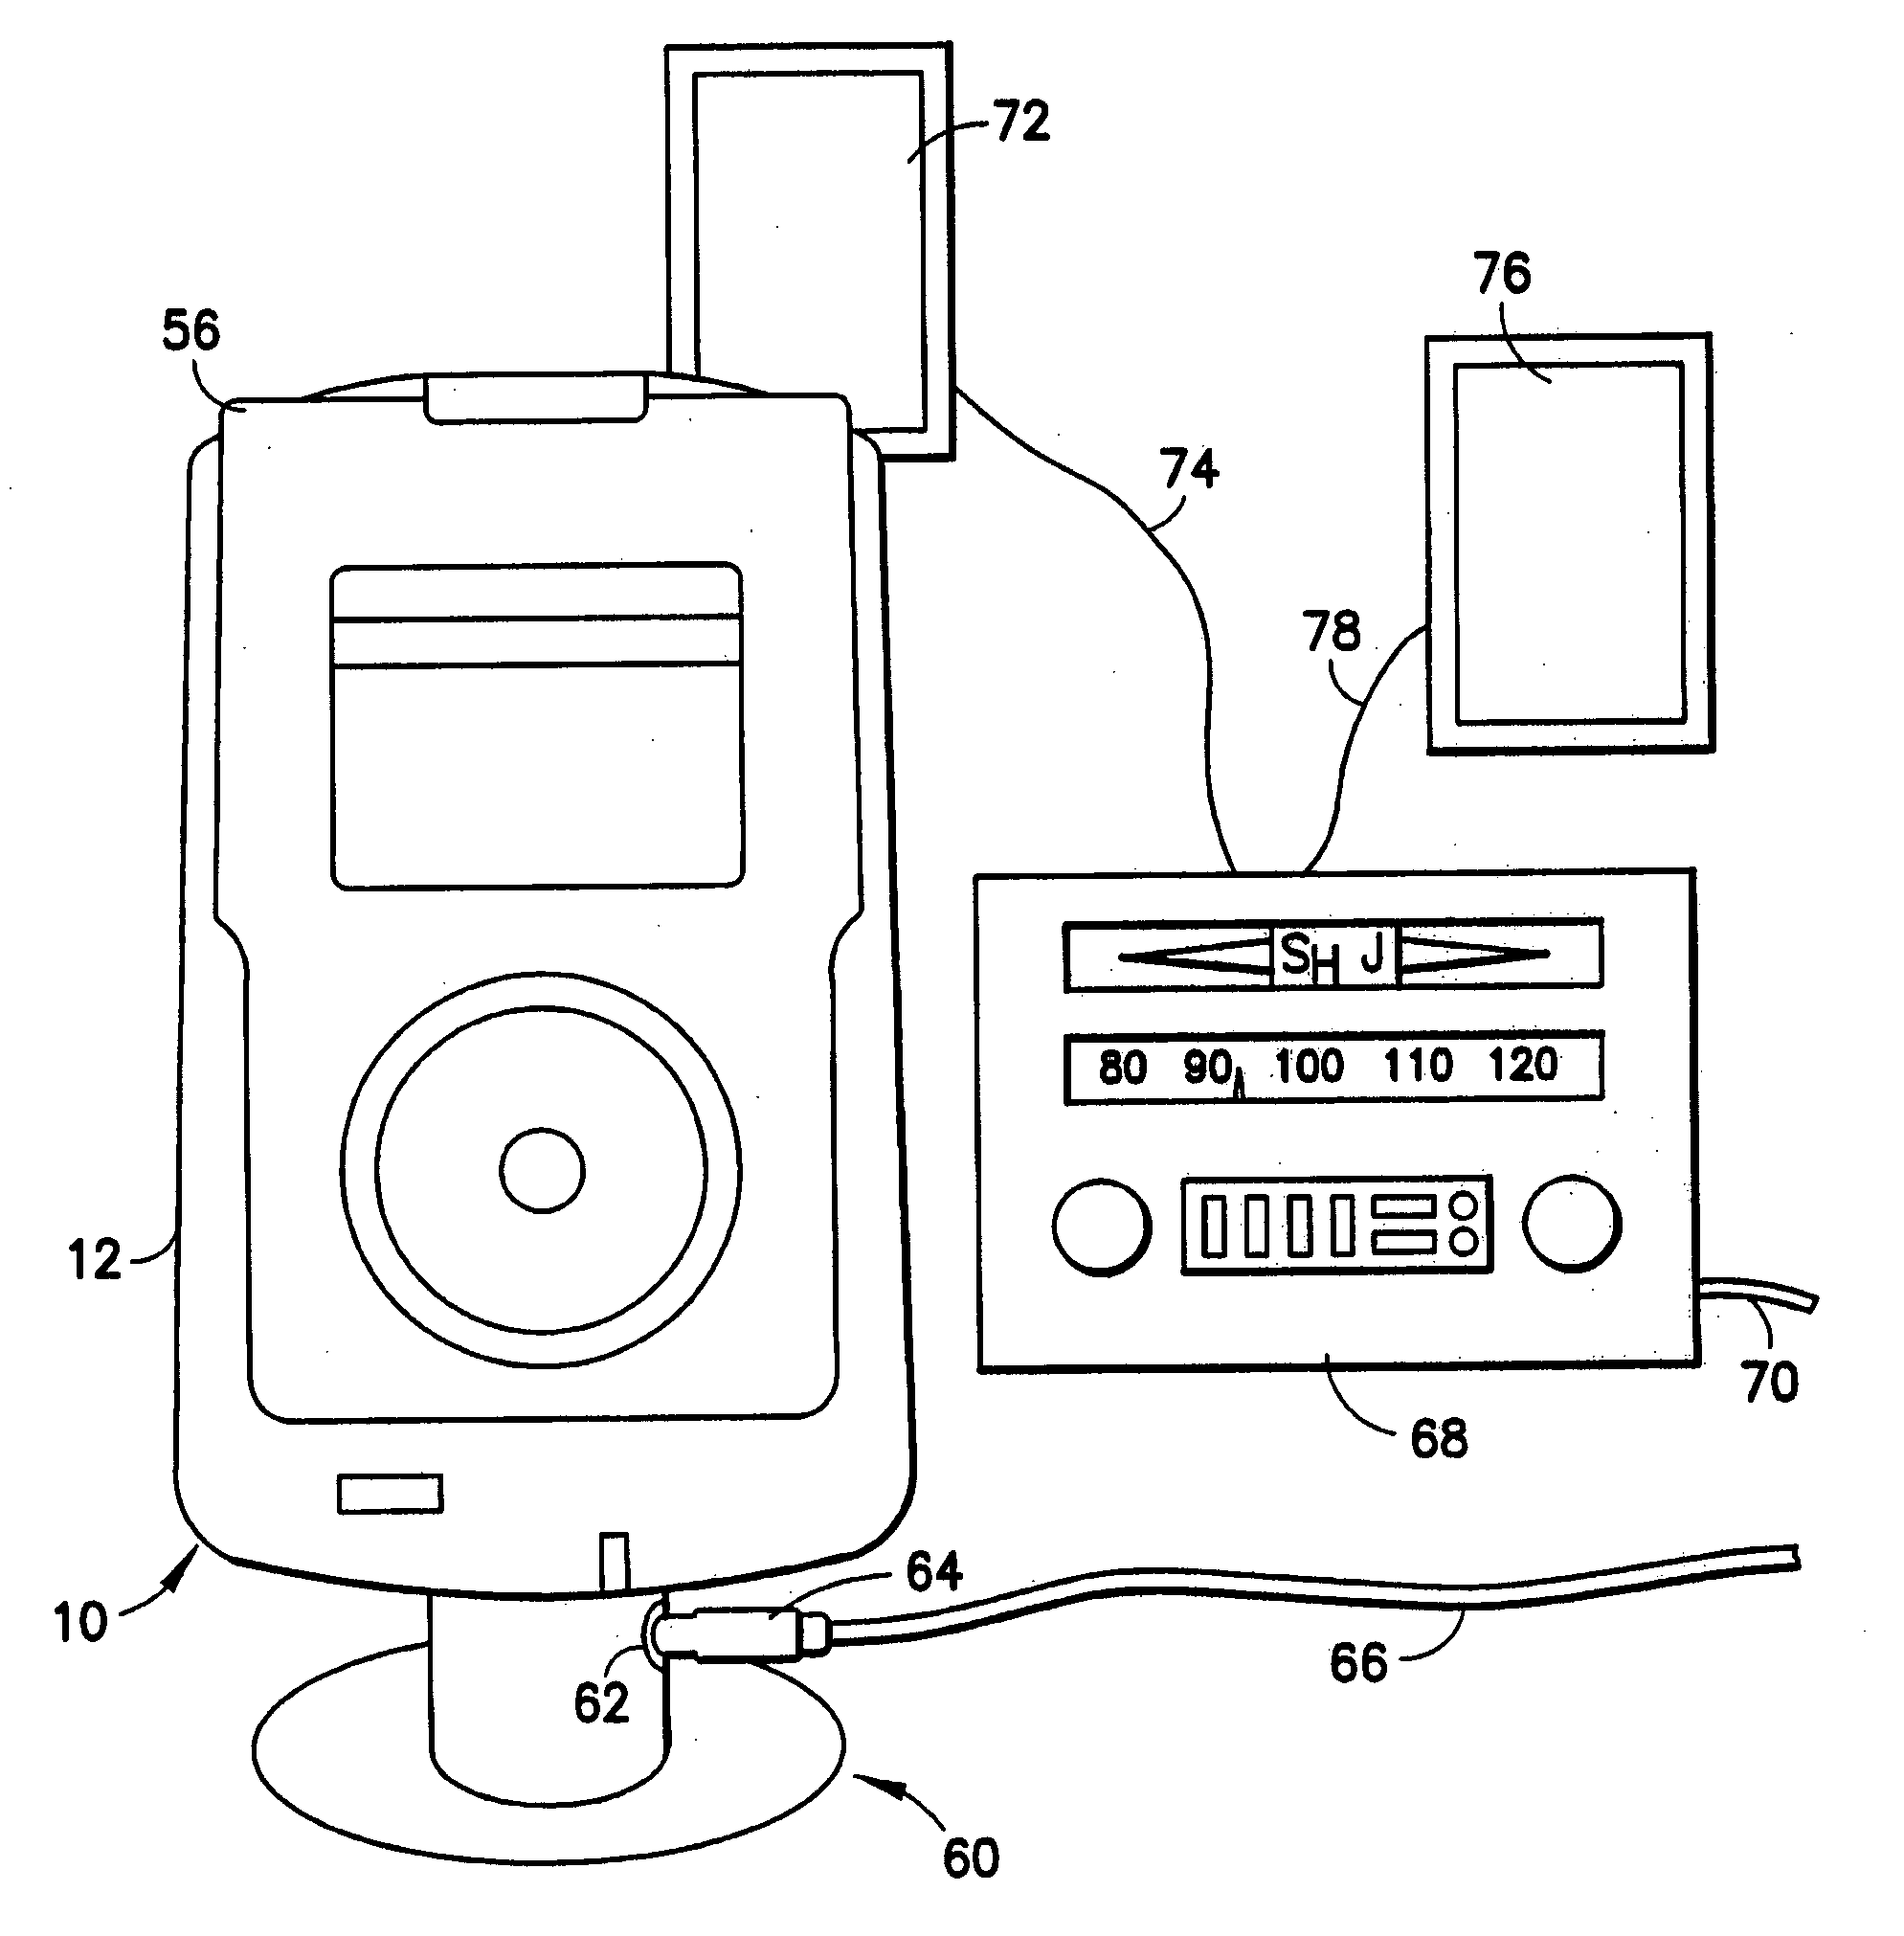 Modular adaptor assembly for personal digital appliance